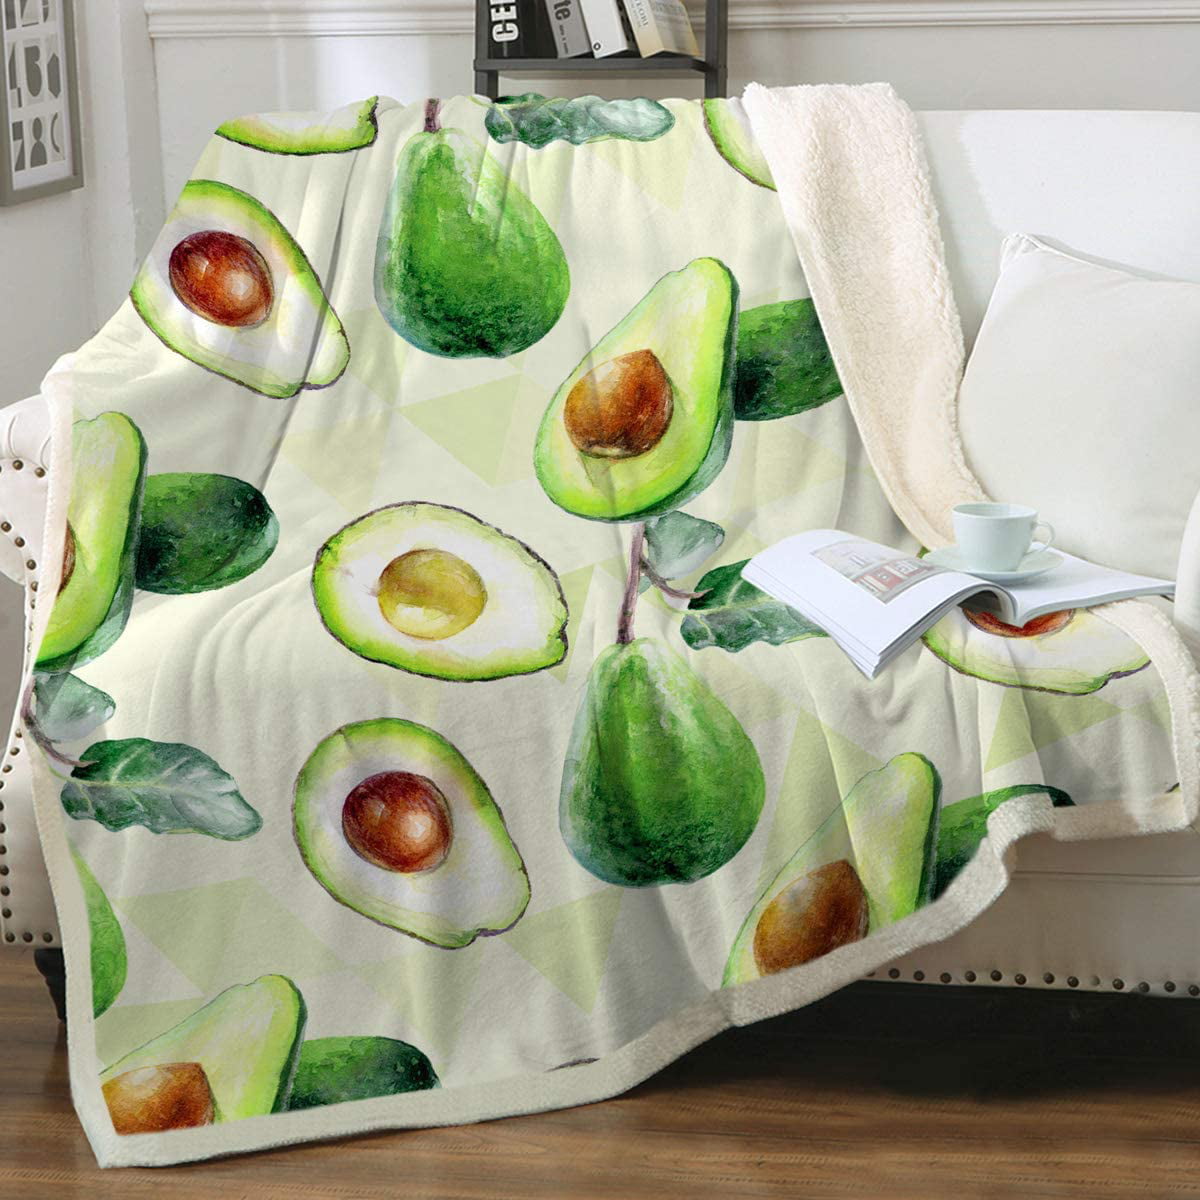 Flannel Fleece Blanket Full Size Delicious Avocado Egg Blanket,All-Season Plush Blanket for Couch Bed Travelling Camping Or Kids Adults 80X60